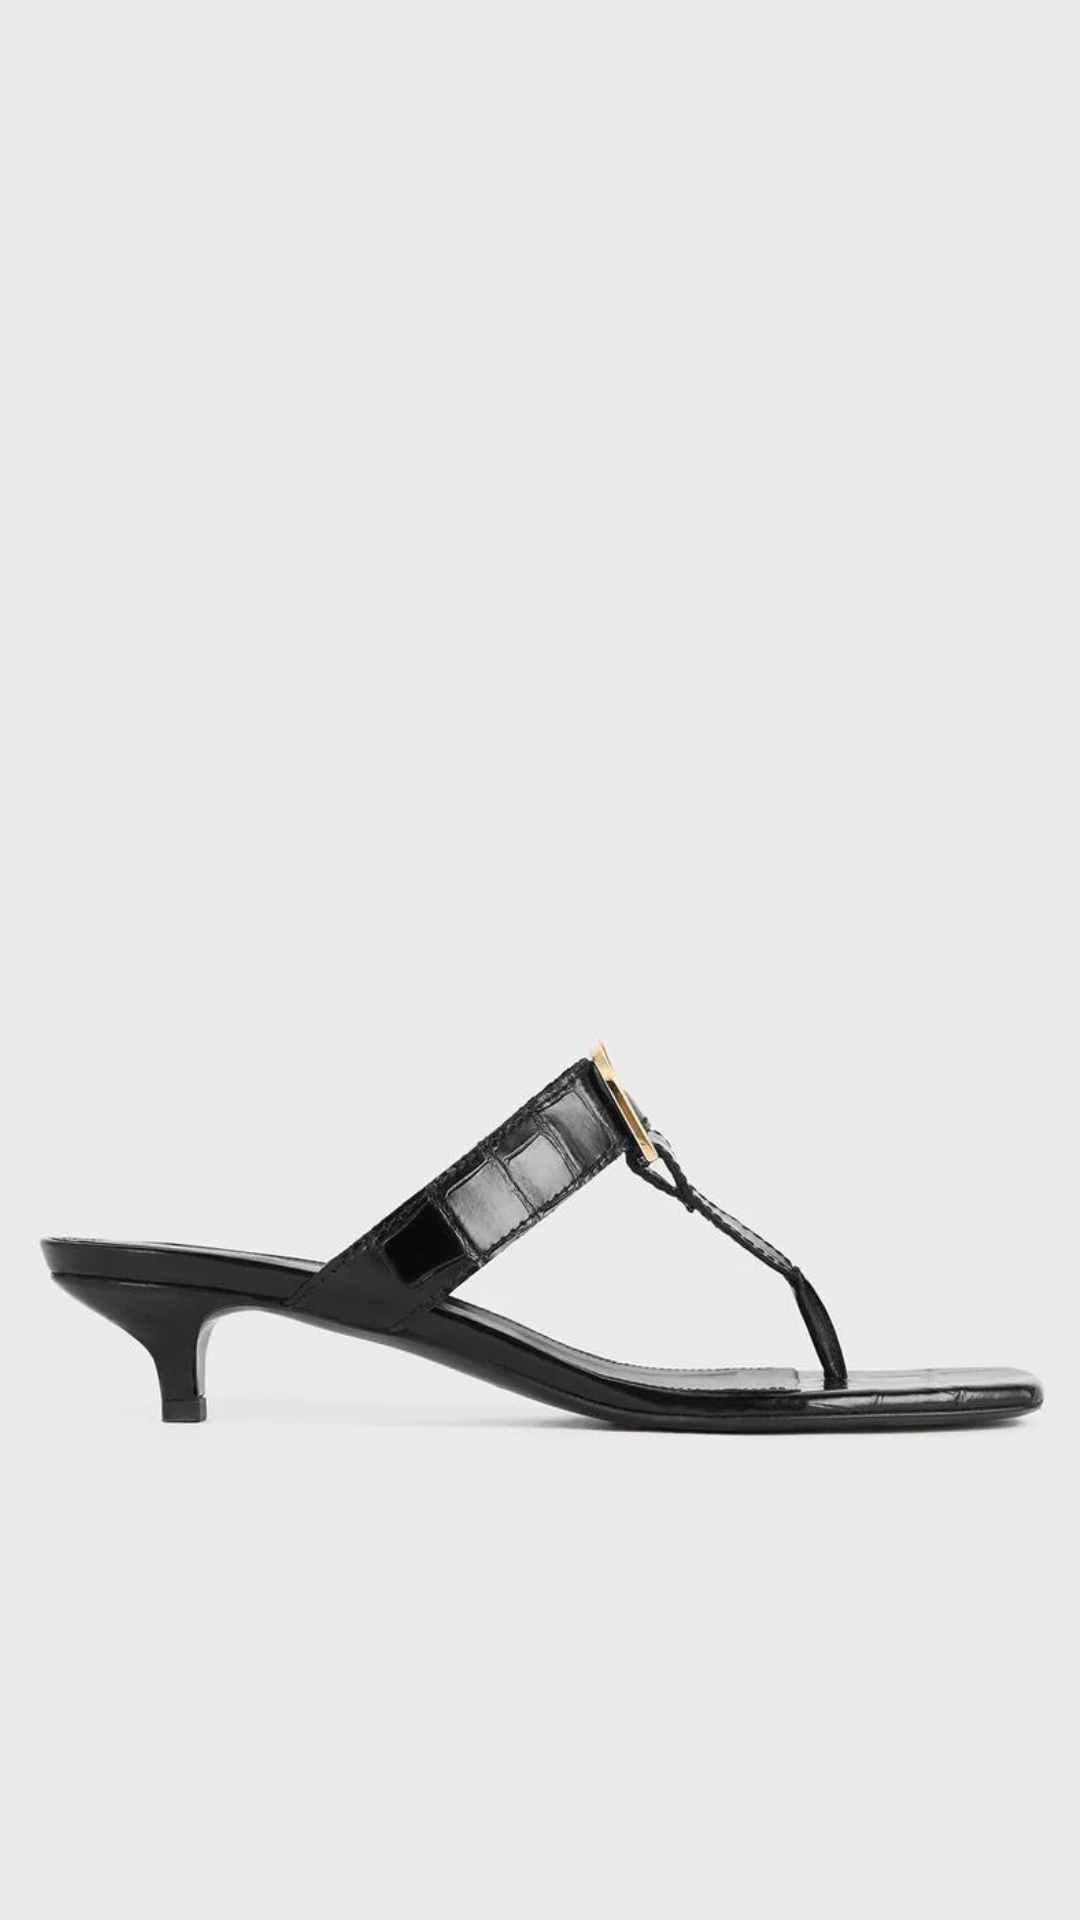 Toteme The Belted Croco Flipflop Heel